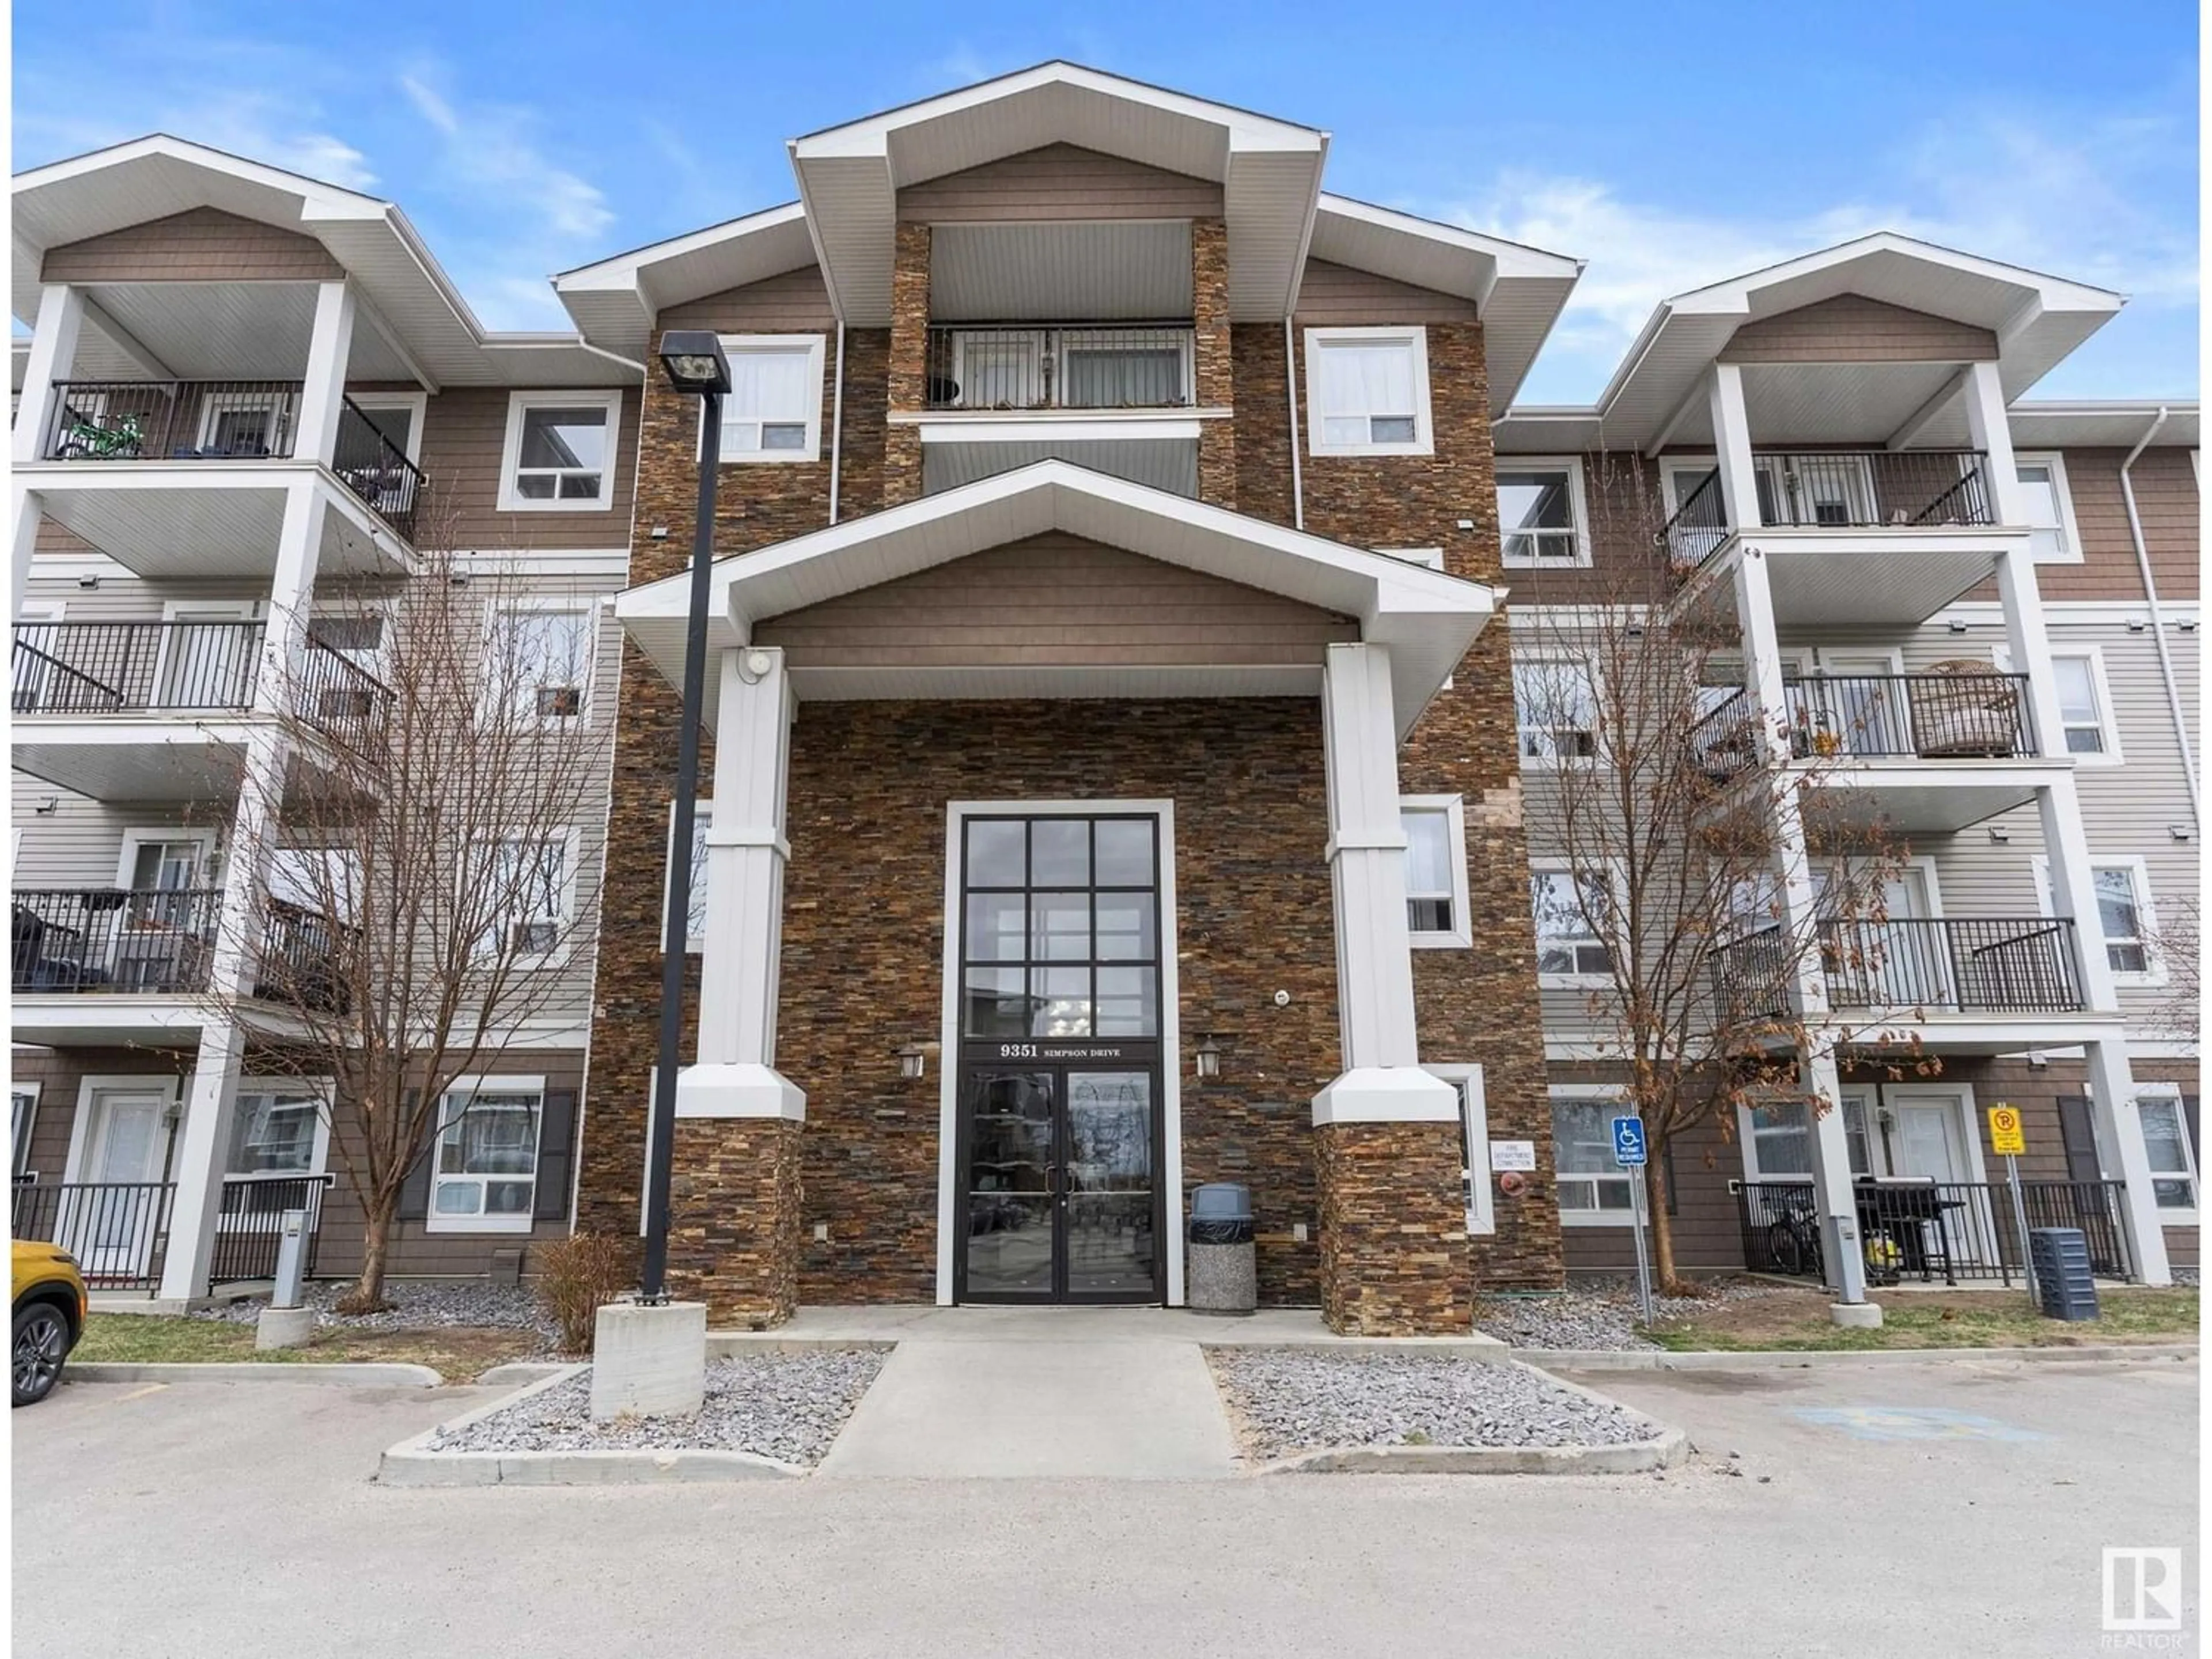 A pic from exterior of the house or condo for #3311 9351 Simpson Drive NW, Edmonton Alberta T6R0N4